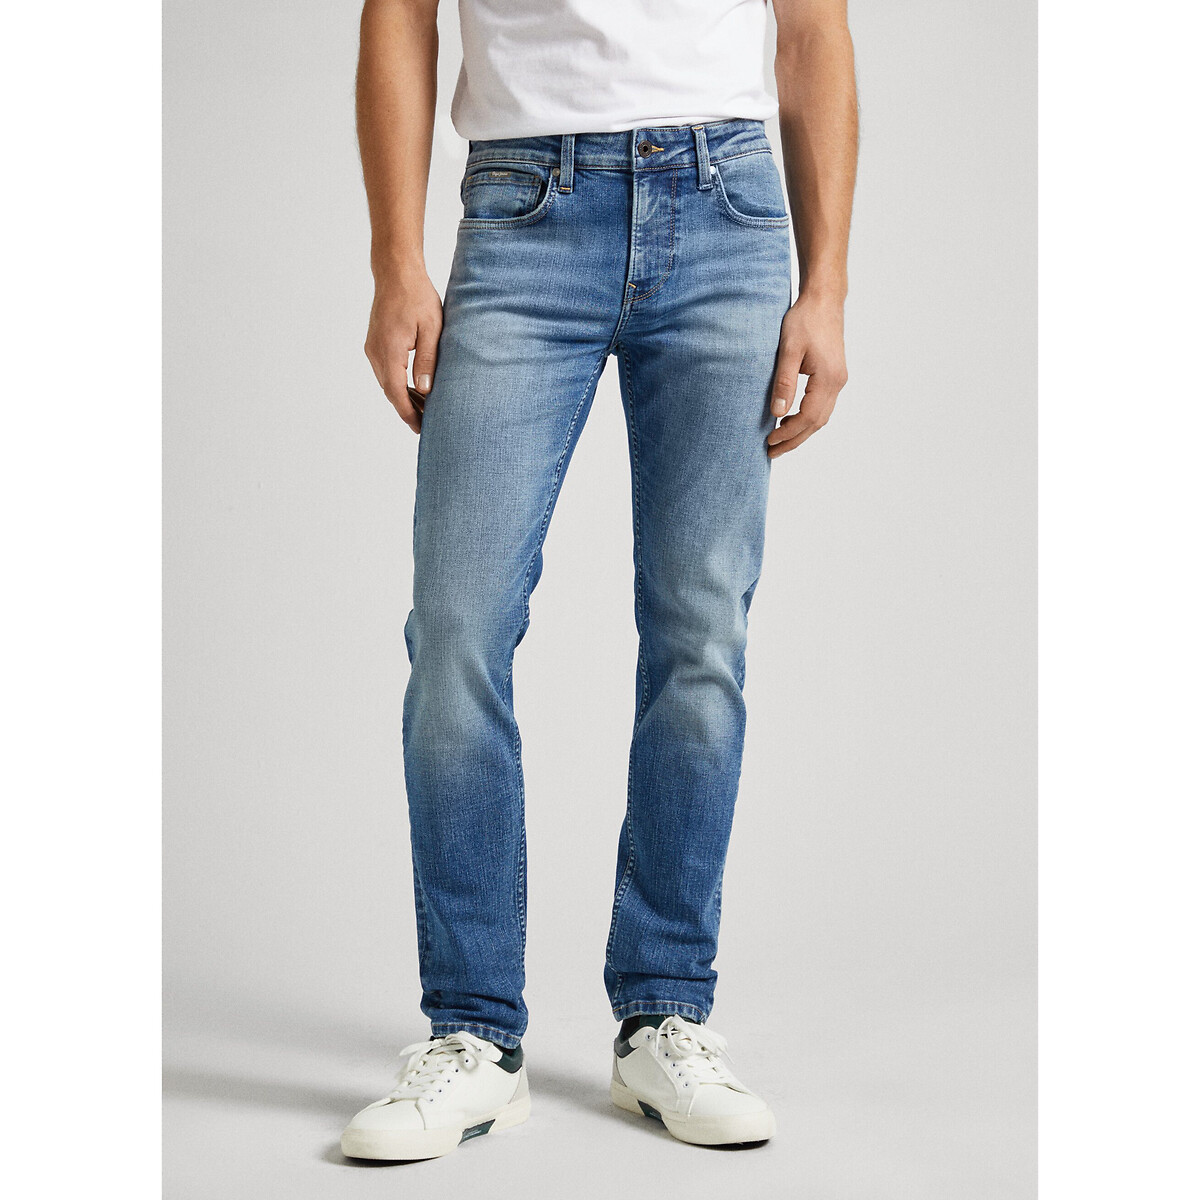 Image of Recycled Cotton Mix Jeans in Slim Fit and Mid Rise